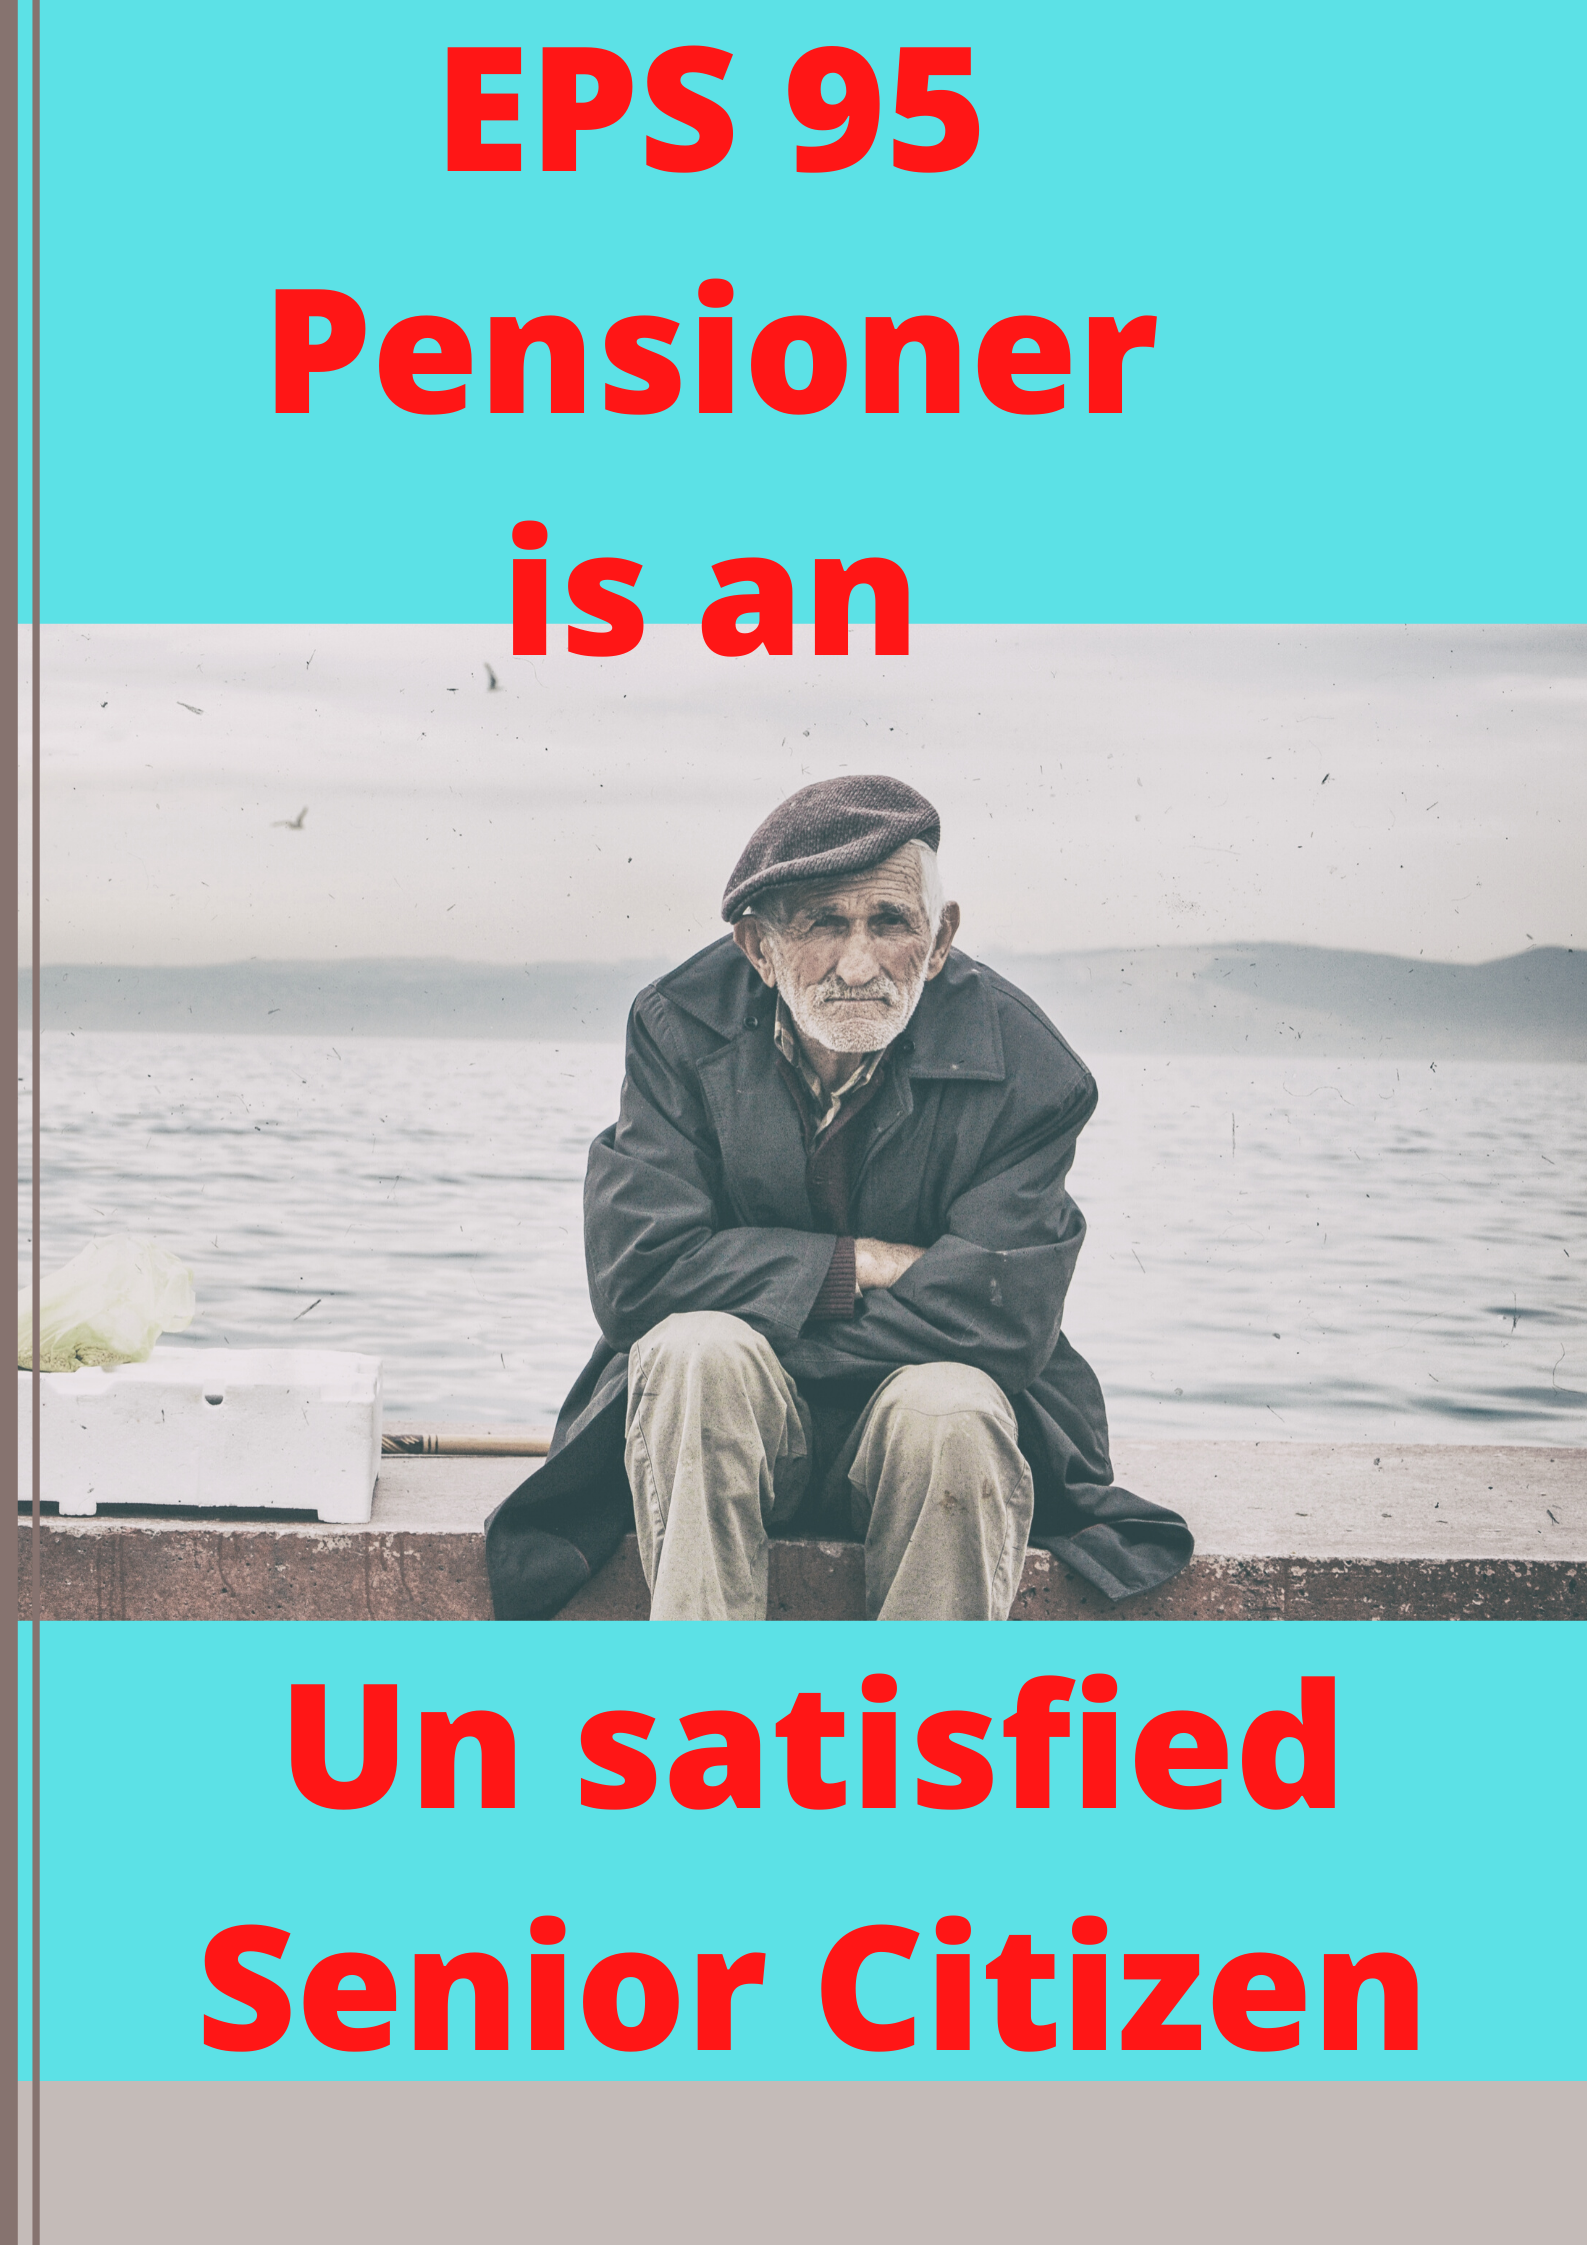 EPS 95 Pensioner is an unsatisfied Senior Citizen